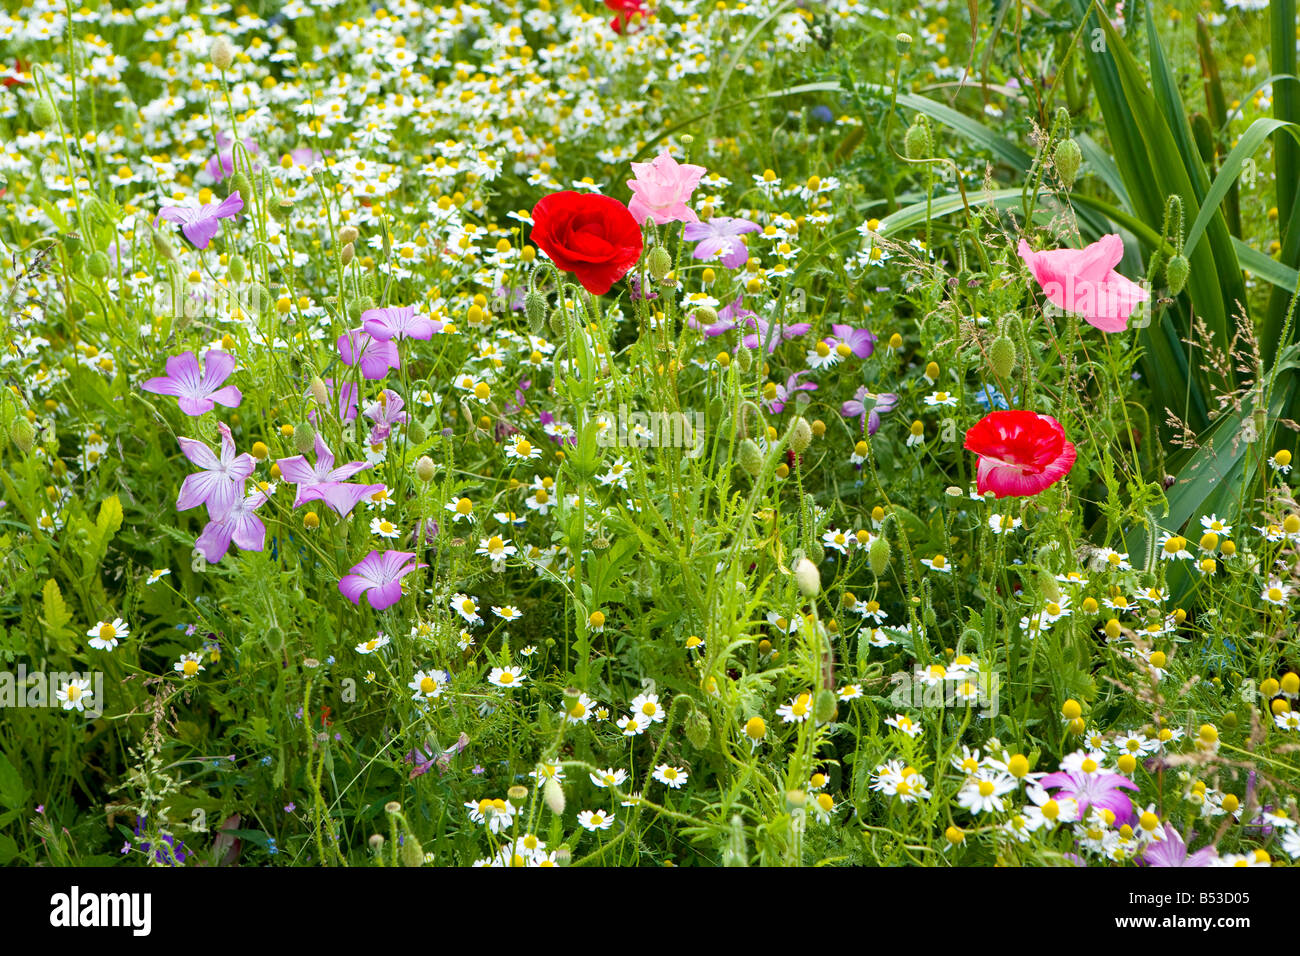 garden with arable weed plants Stock Photo